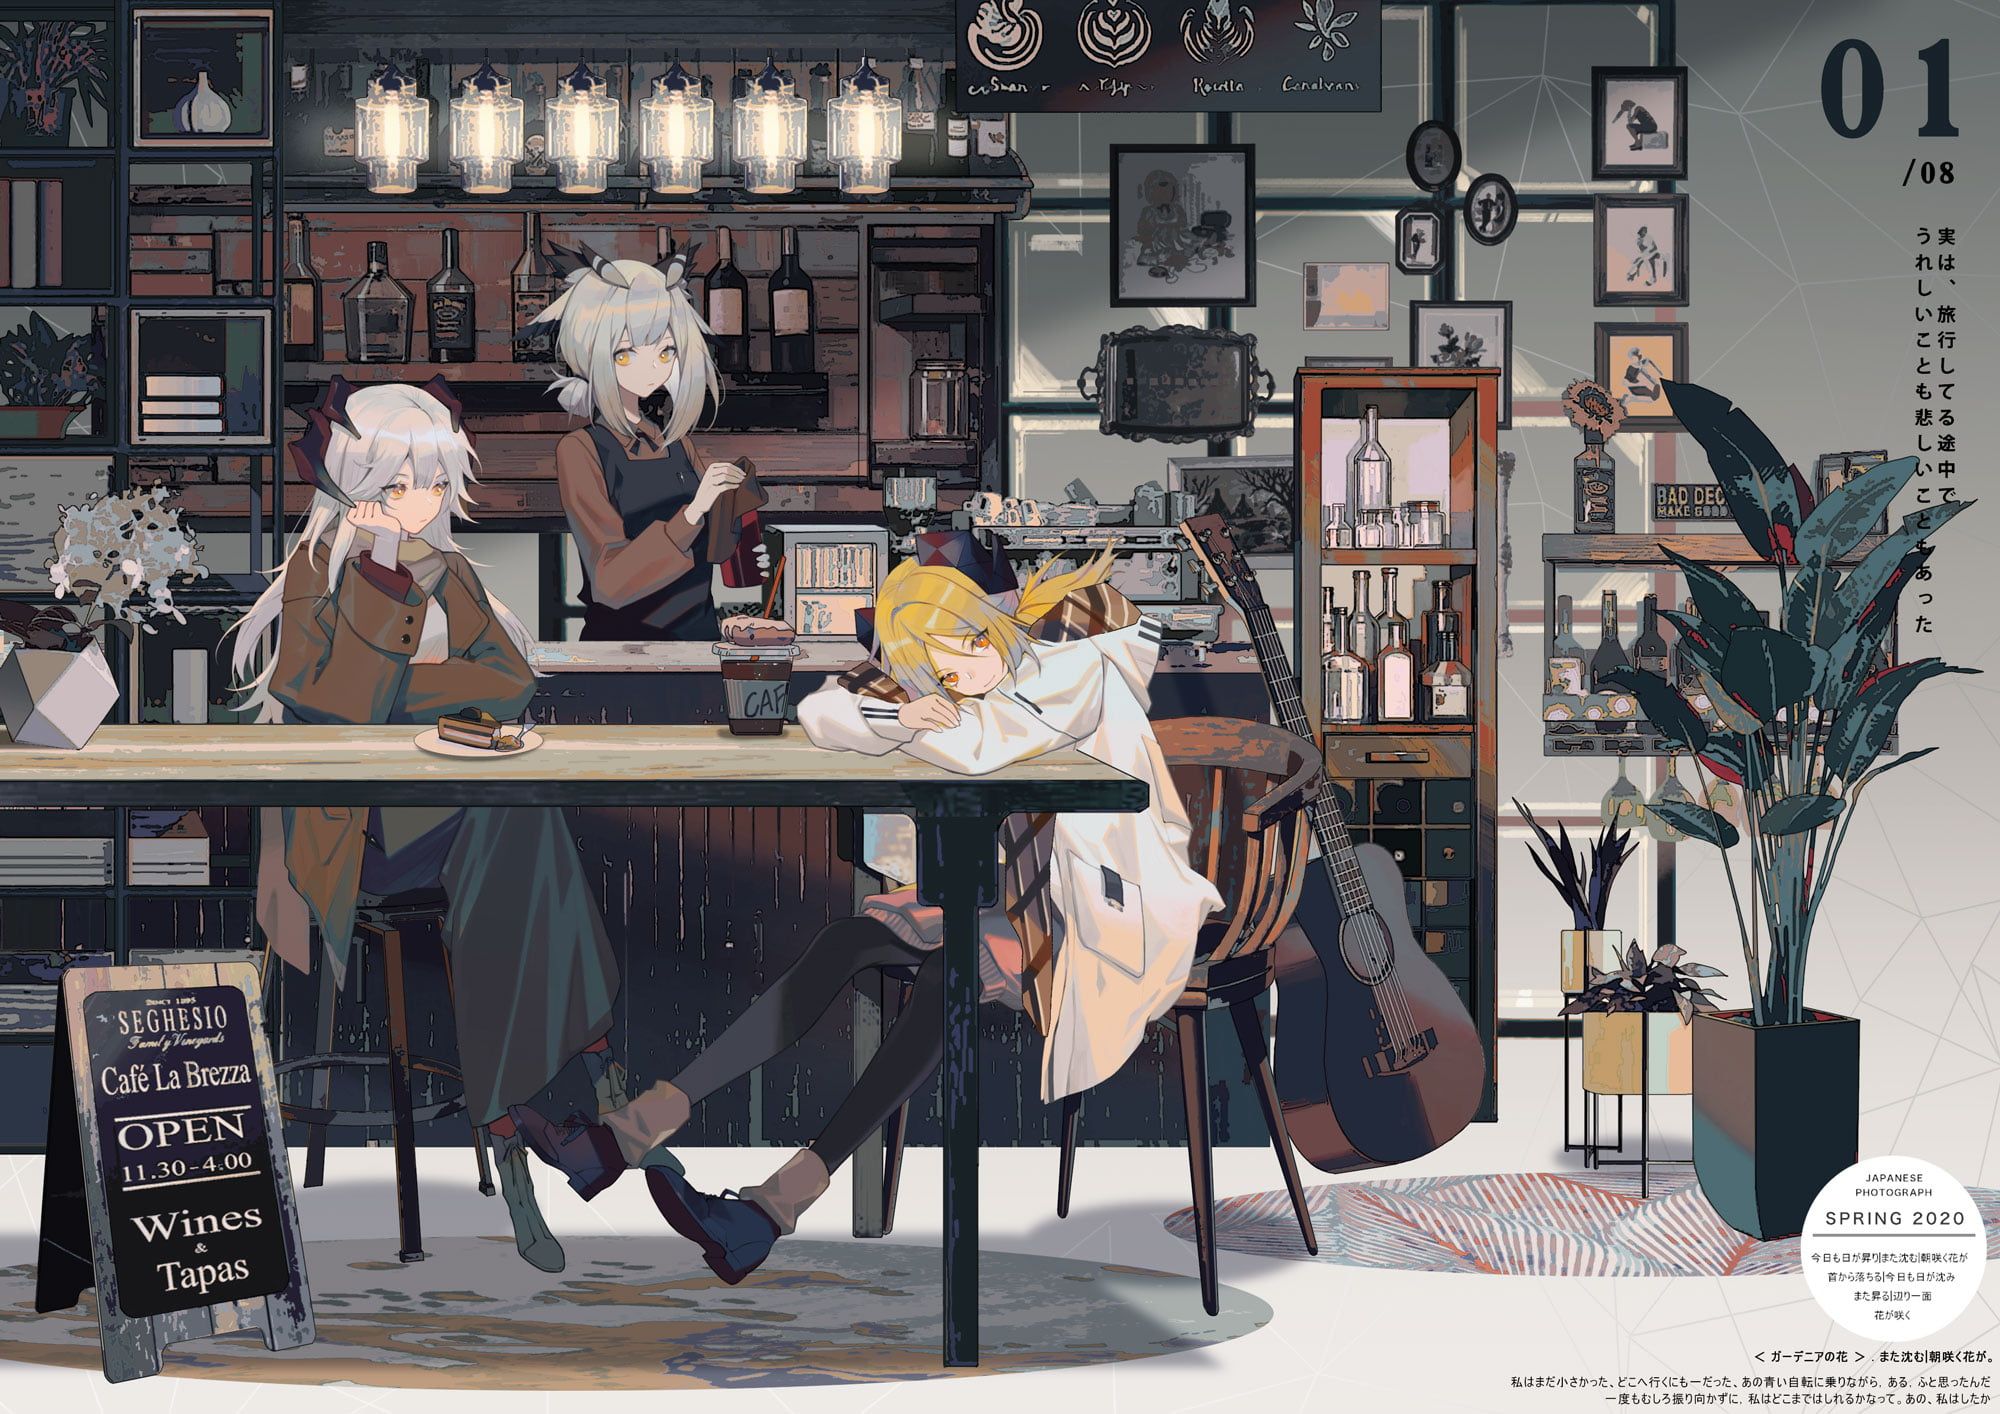 Arknights, anime, plants, cafe, coffee, donuts, cake, saria